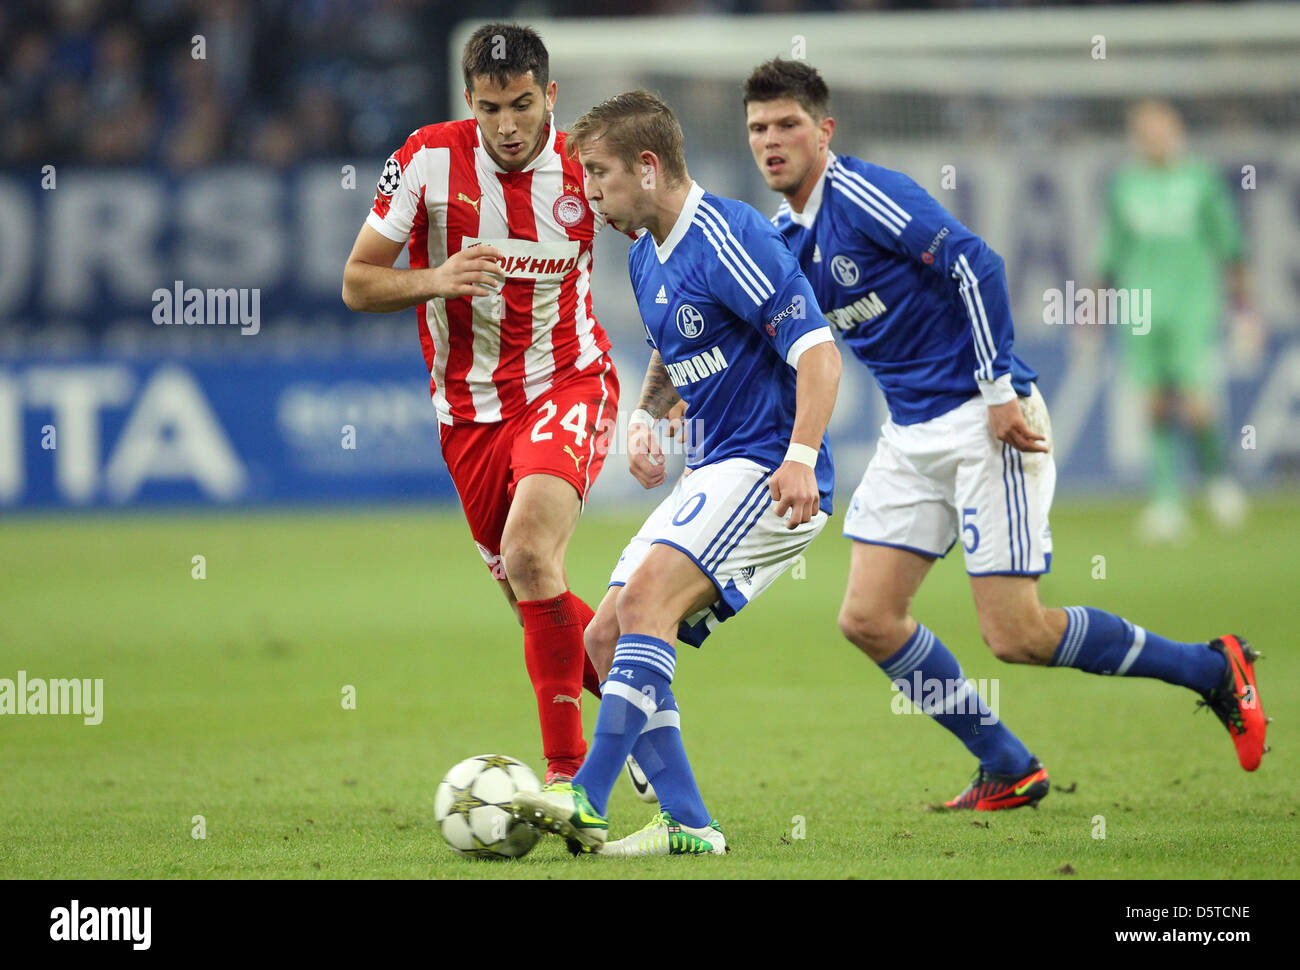 Schalke's Lewis Holtby (C) and Klaas-Jan Huntelaar (R) vie for the ball with Kostas Manolas (L) of Olympiacos Piraeus during the Champions League Group B soccer match between FC Schalke 04 and Olympiacos FC at Stadion Gelsenkirchen, Gelsenkirchen, 21 November 2012. Photo: Friso Gentsch/dpa  +++(c) dpa - Bildfunk+++ Stock Photo